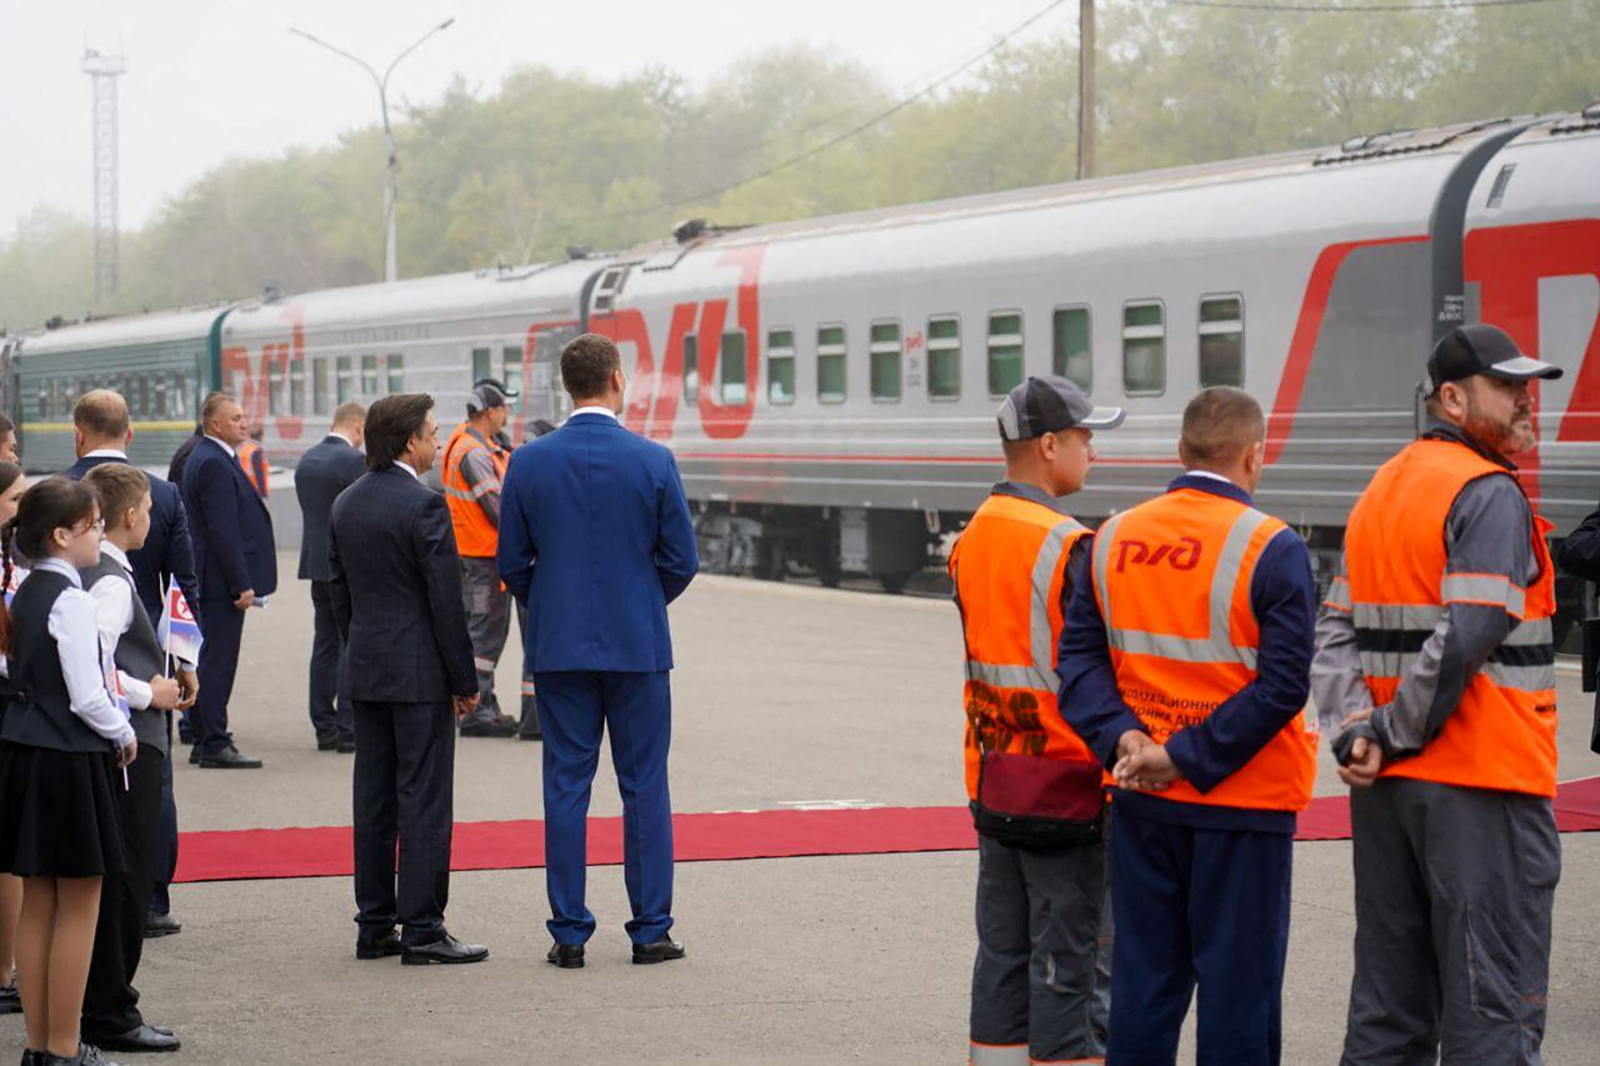 Governor of Russia's Khabarovsk Region Mikhail Degtyarev attends a ceremony to welcome North Korea's leader Kim Jong Un at a railway station in the city of Komsomolsk-on-Amur in the Khabarovsk region, Russia, on September 15.